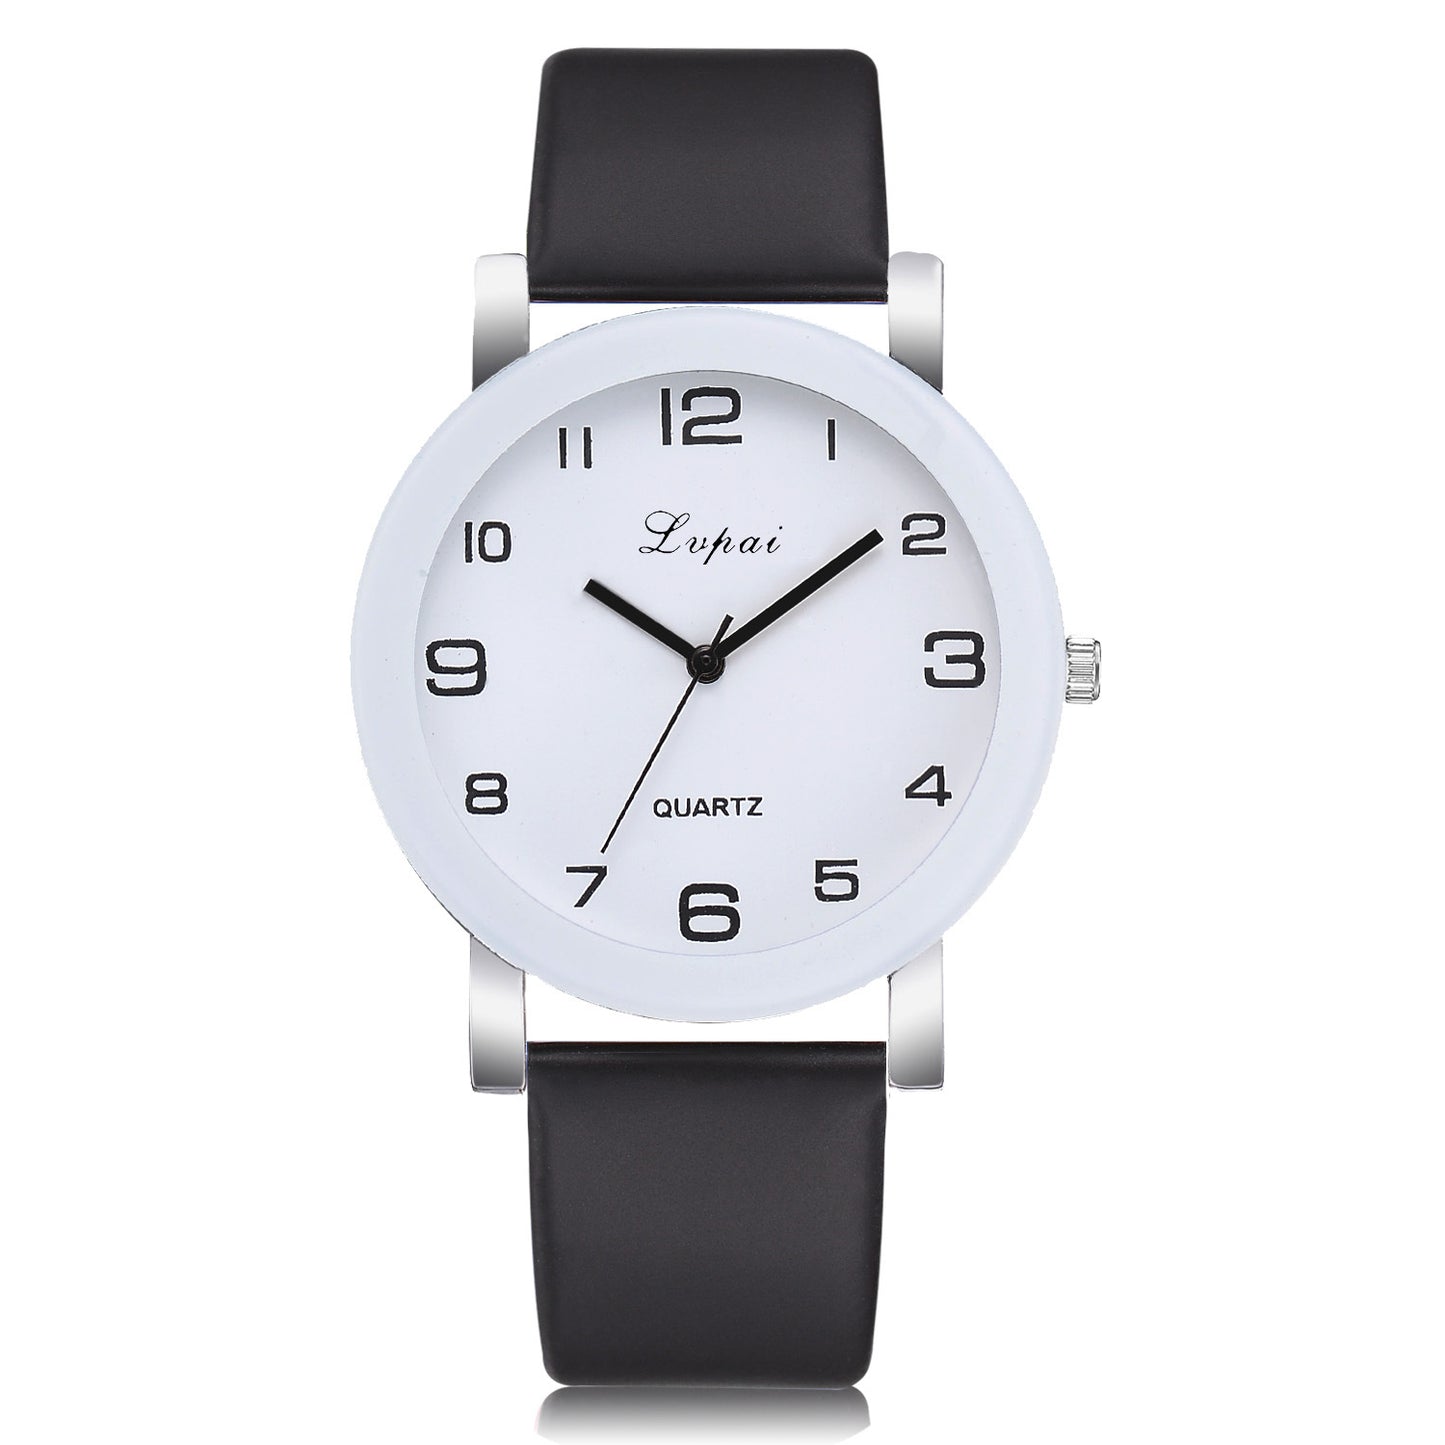 Simple casual digital student watch